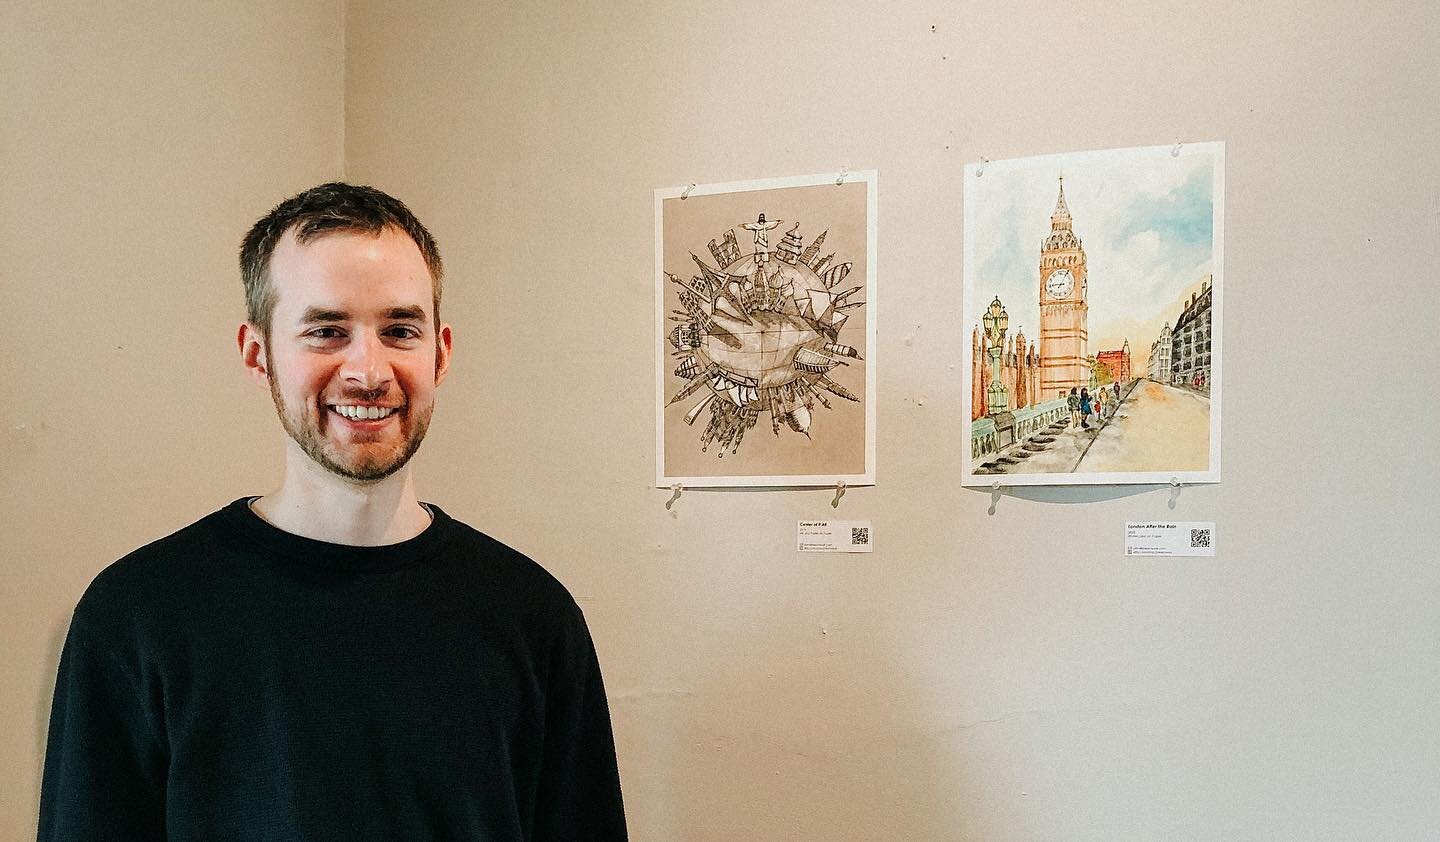 Join us in welcoming our artist of the month for April @jedwards1105! John shares with us a selection of his drawings, paintings and Astrophotography. Through these pieces, John explores architecture around the world and in the night sky. Come check 